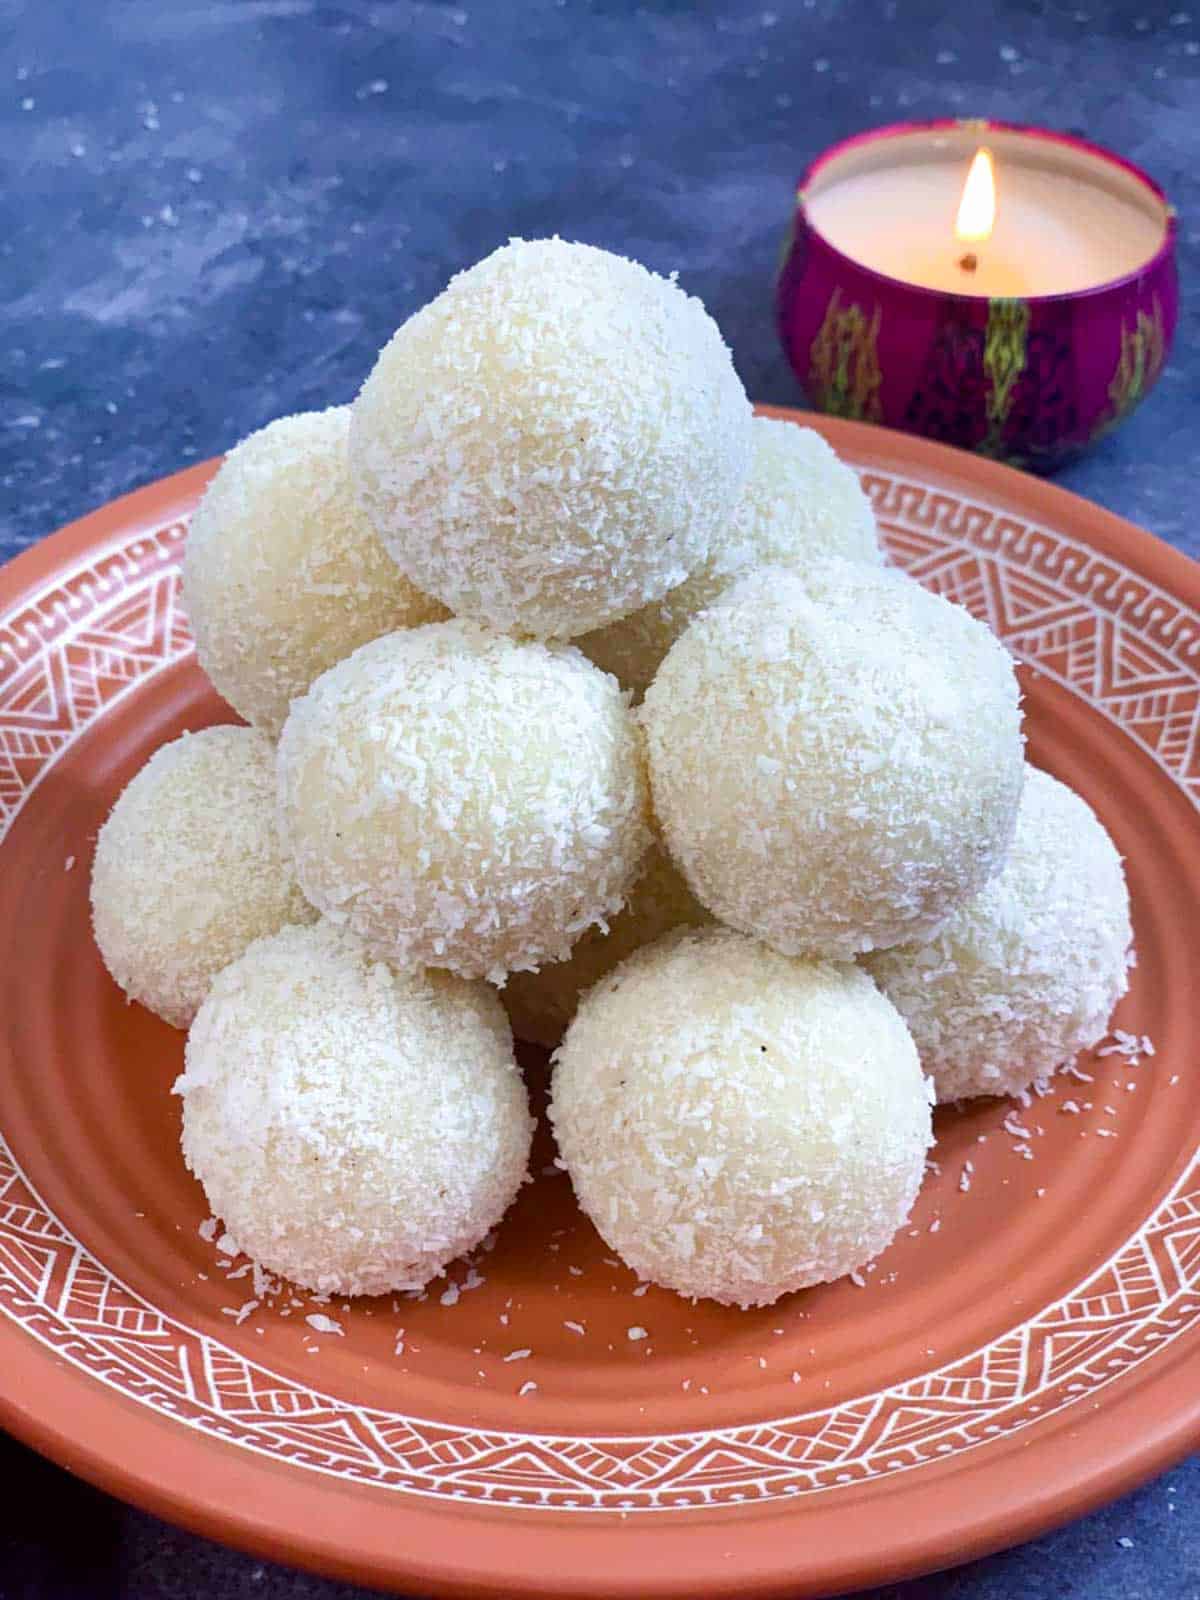 instant coconut laddos place over one another on a plate with light candle on the side